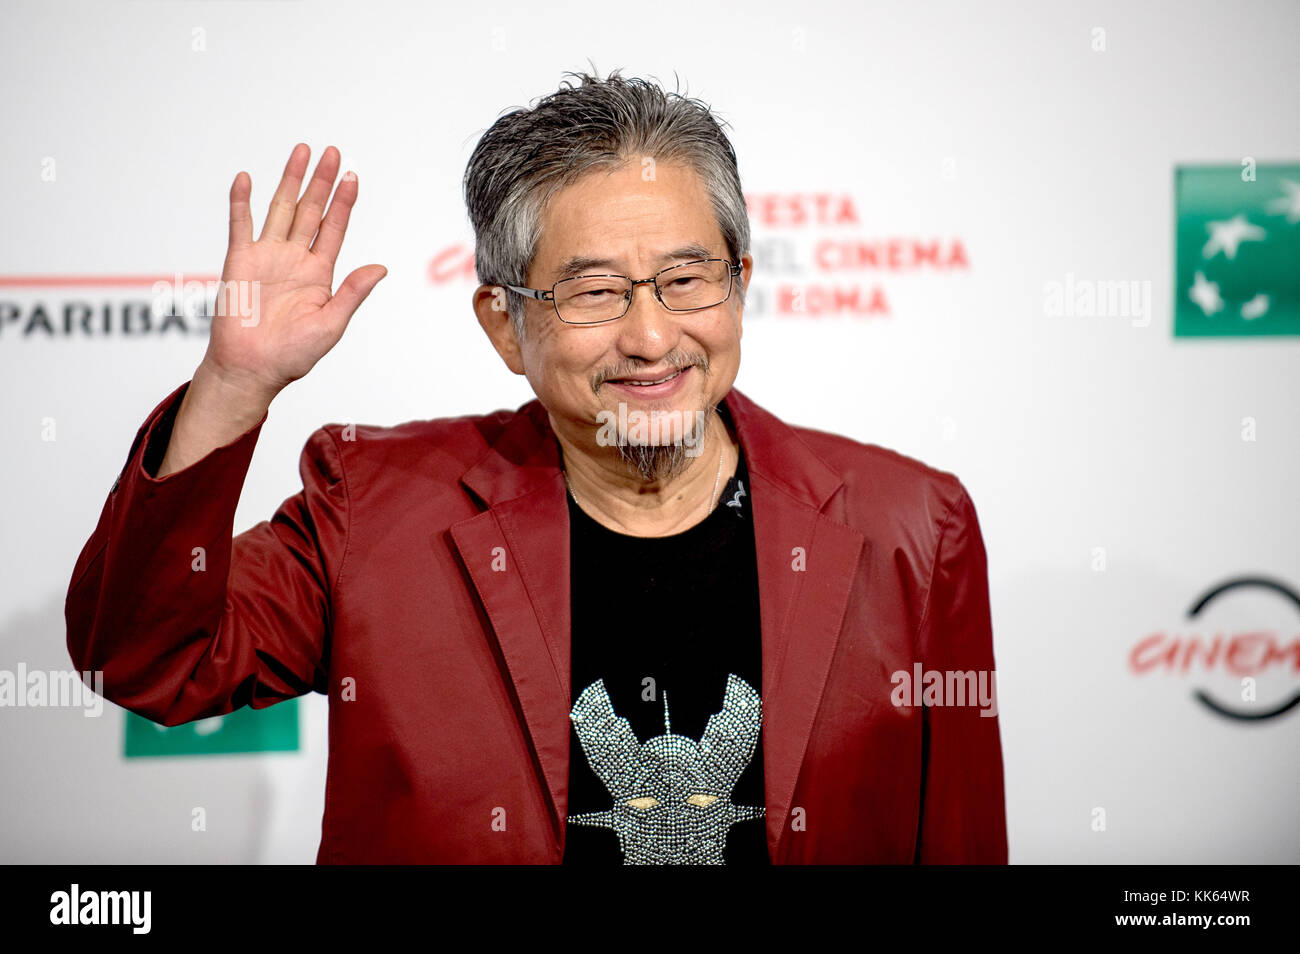 Photocall for 'Mazinger Z Infinity' during the 12th Rome Film Festival at Auditorium Parco Della Musica in Rome, Italy.  Featuring: Go Nagai Where: Rome, Lazio, Italy When: 28 Oct 2017 Credit: WENN.com Stock Photo